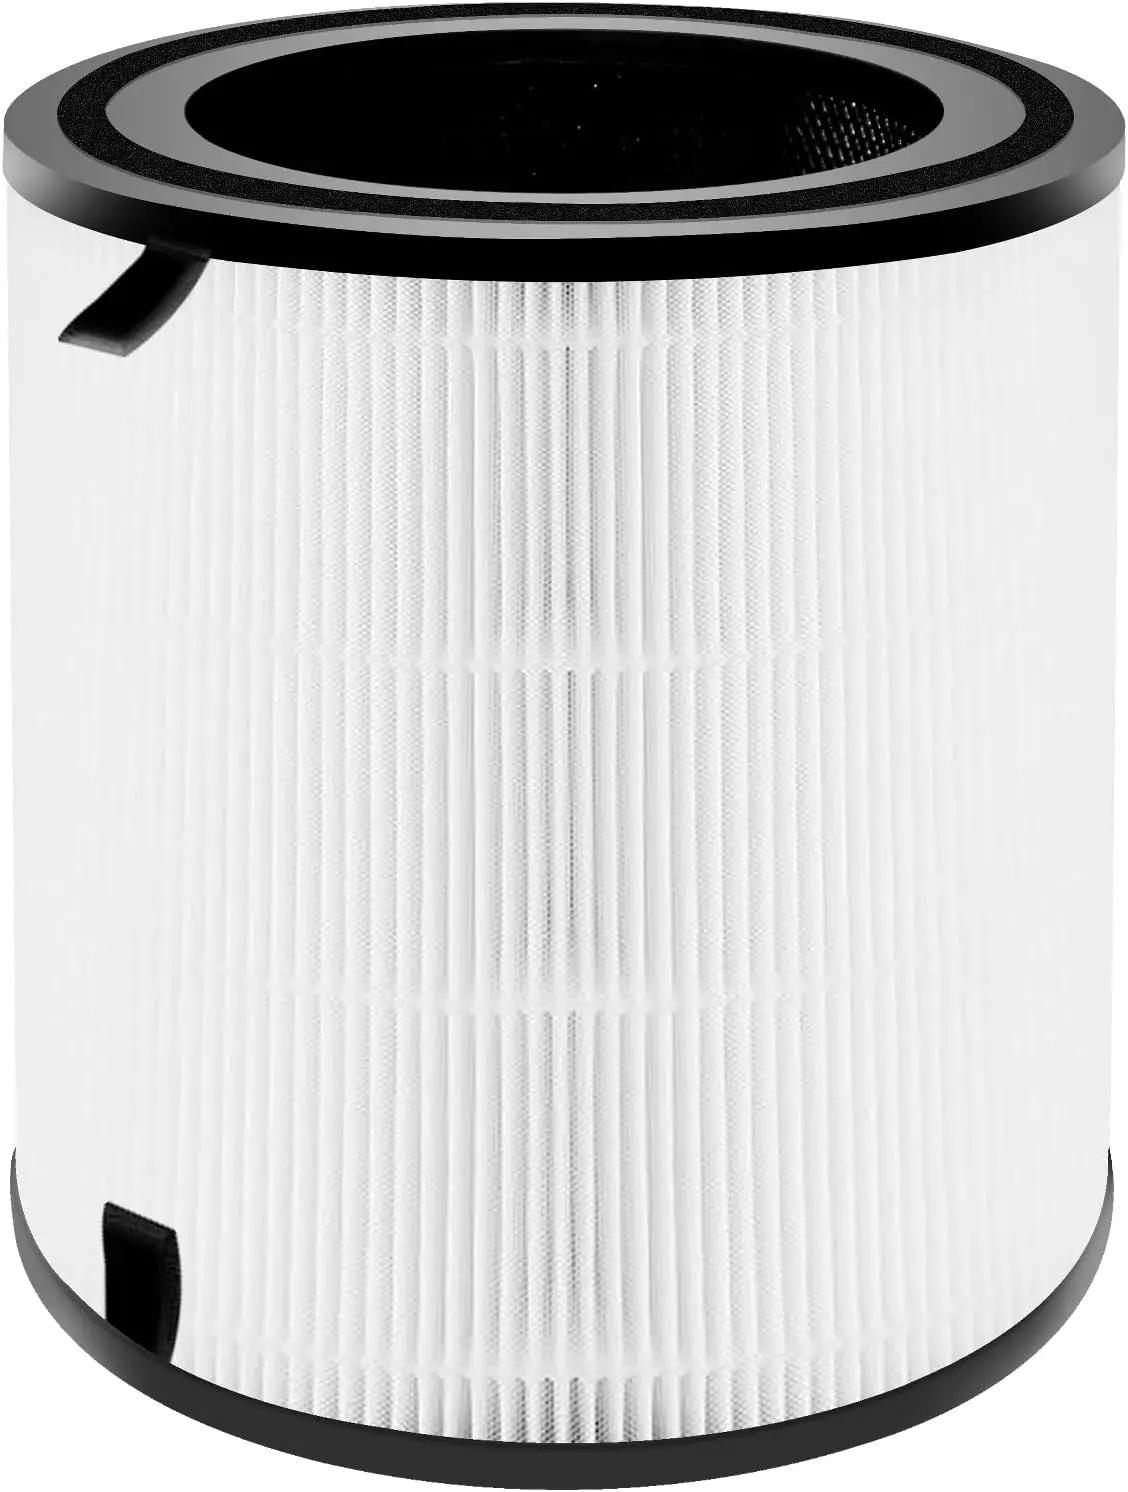 

Filter Replacement for LEVOIT Air Puri-fier, 3-in-1 Pre, H13 High-Efficiency Activated Carbon Filtration System, Replace Part# L